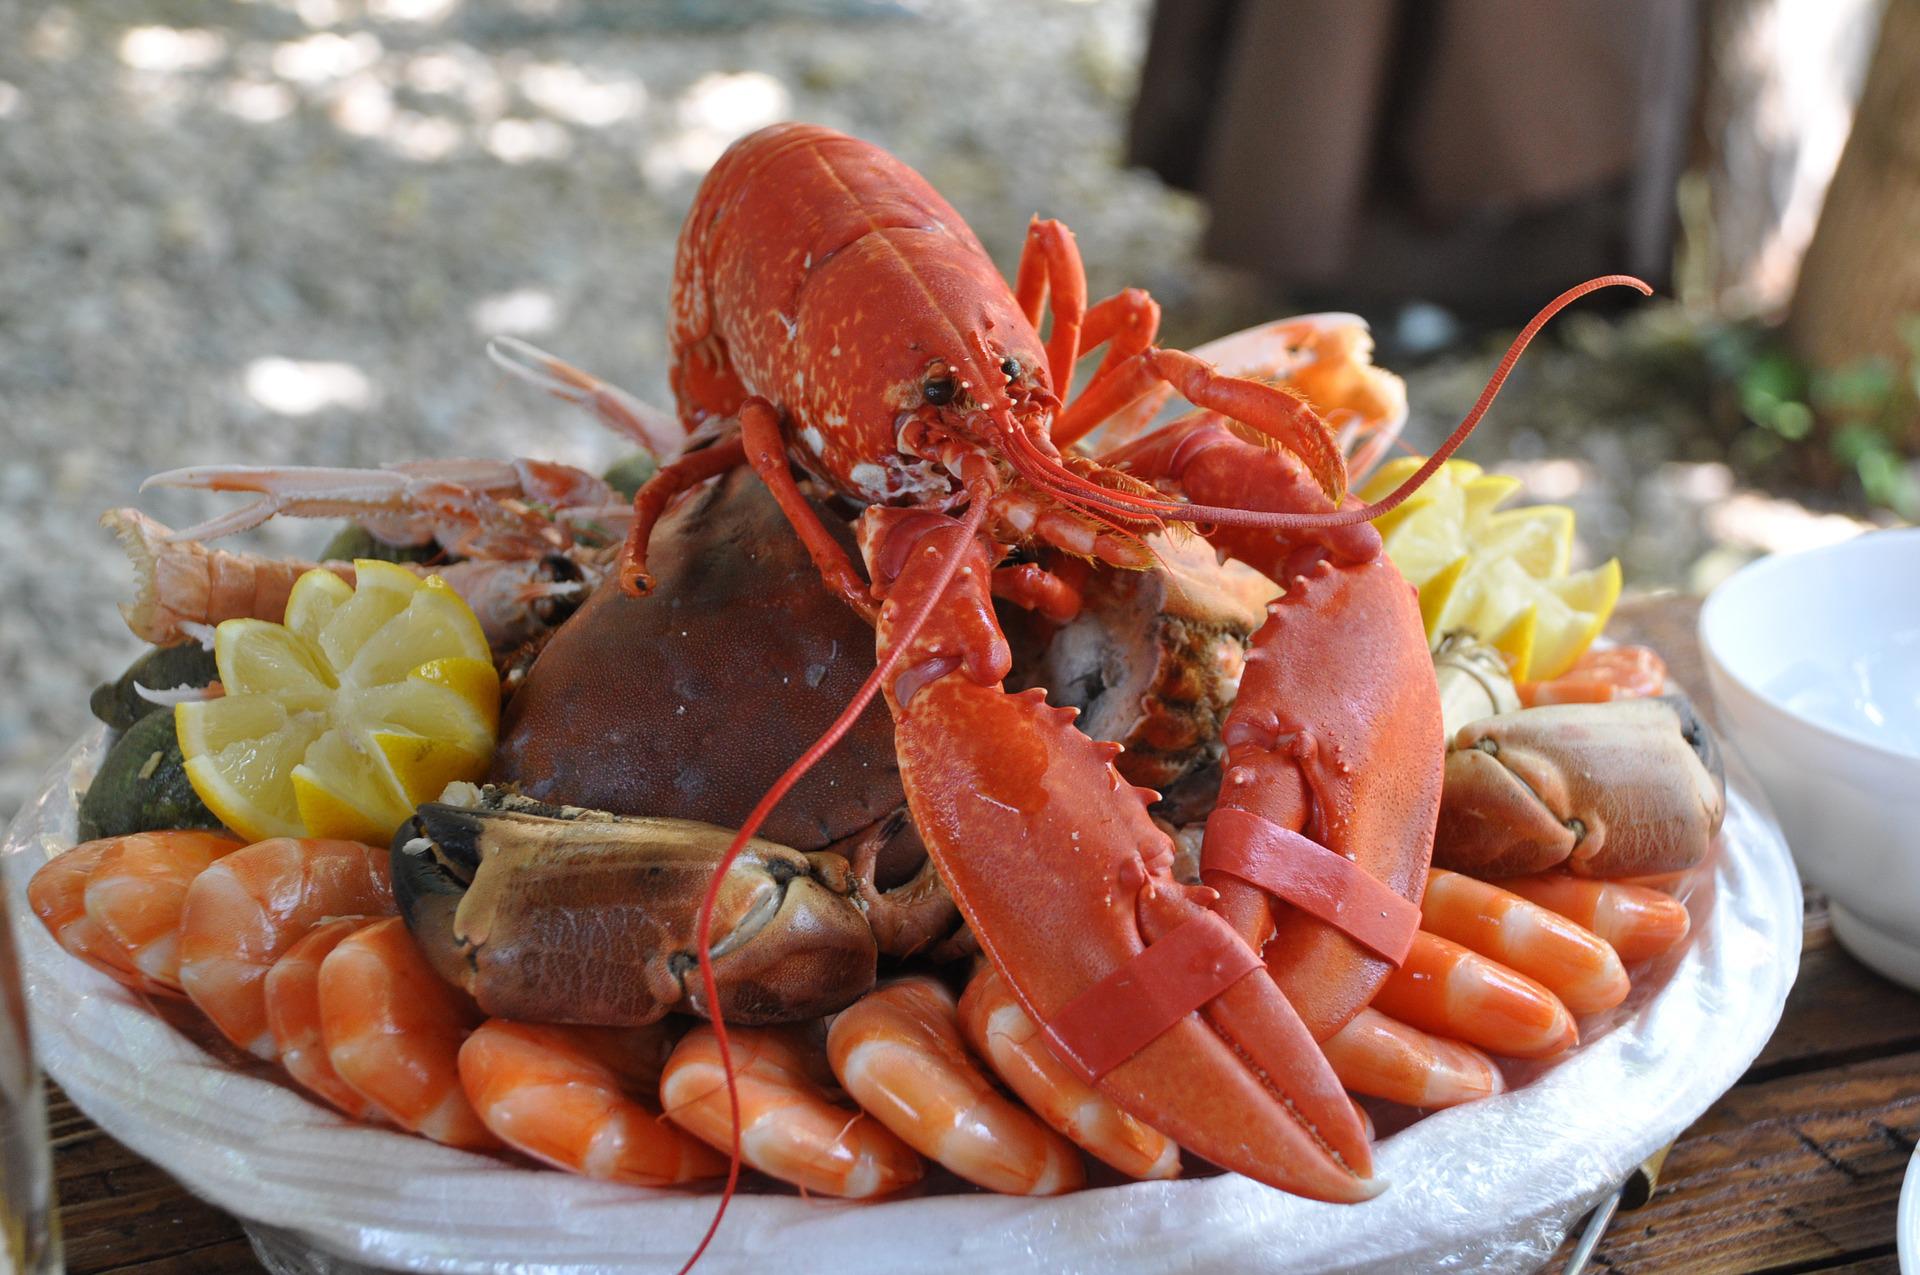 Enjoy signature lobster and more at Twisted Lobster Cape Coral.